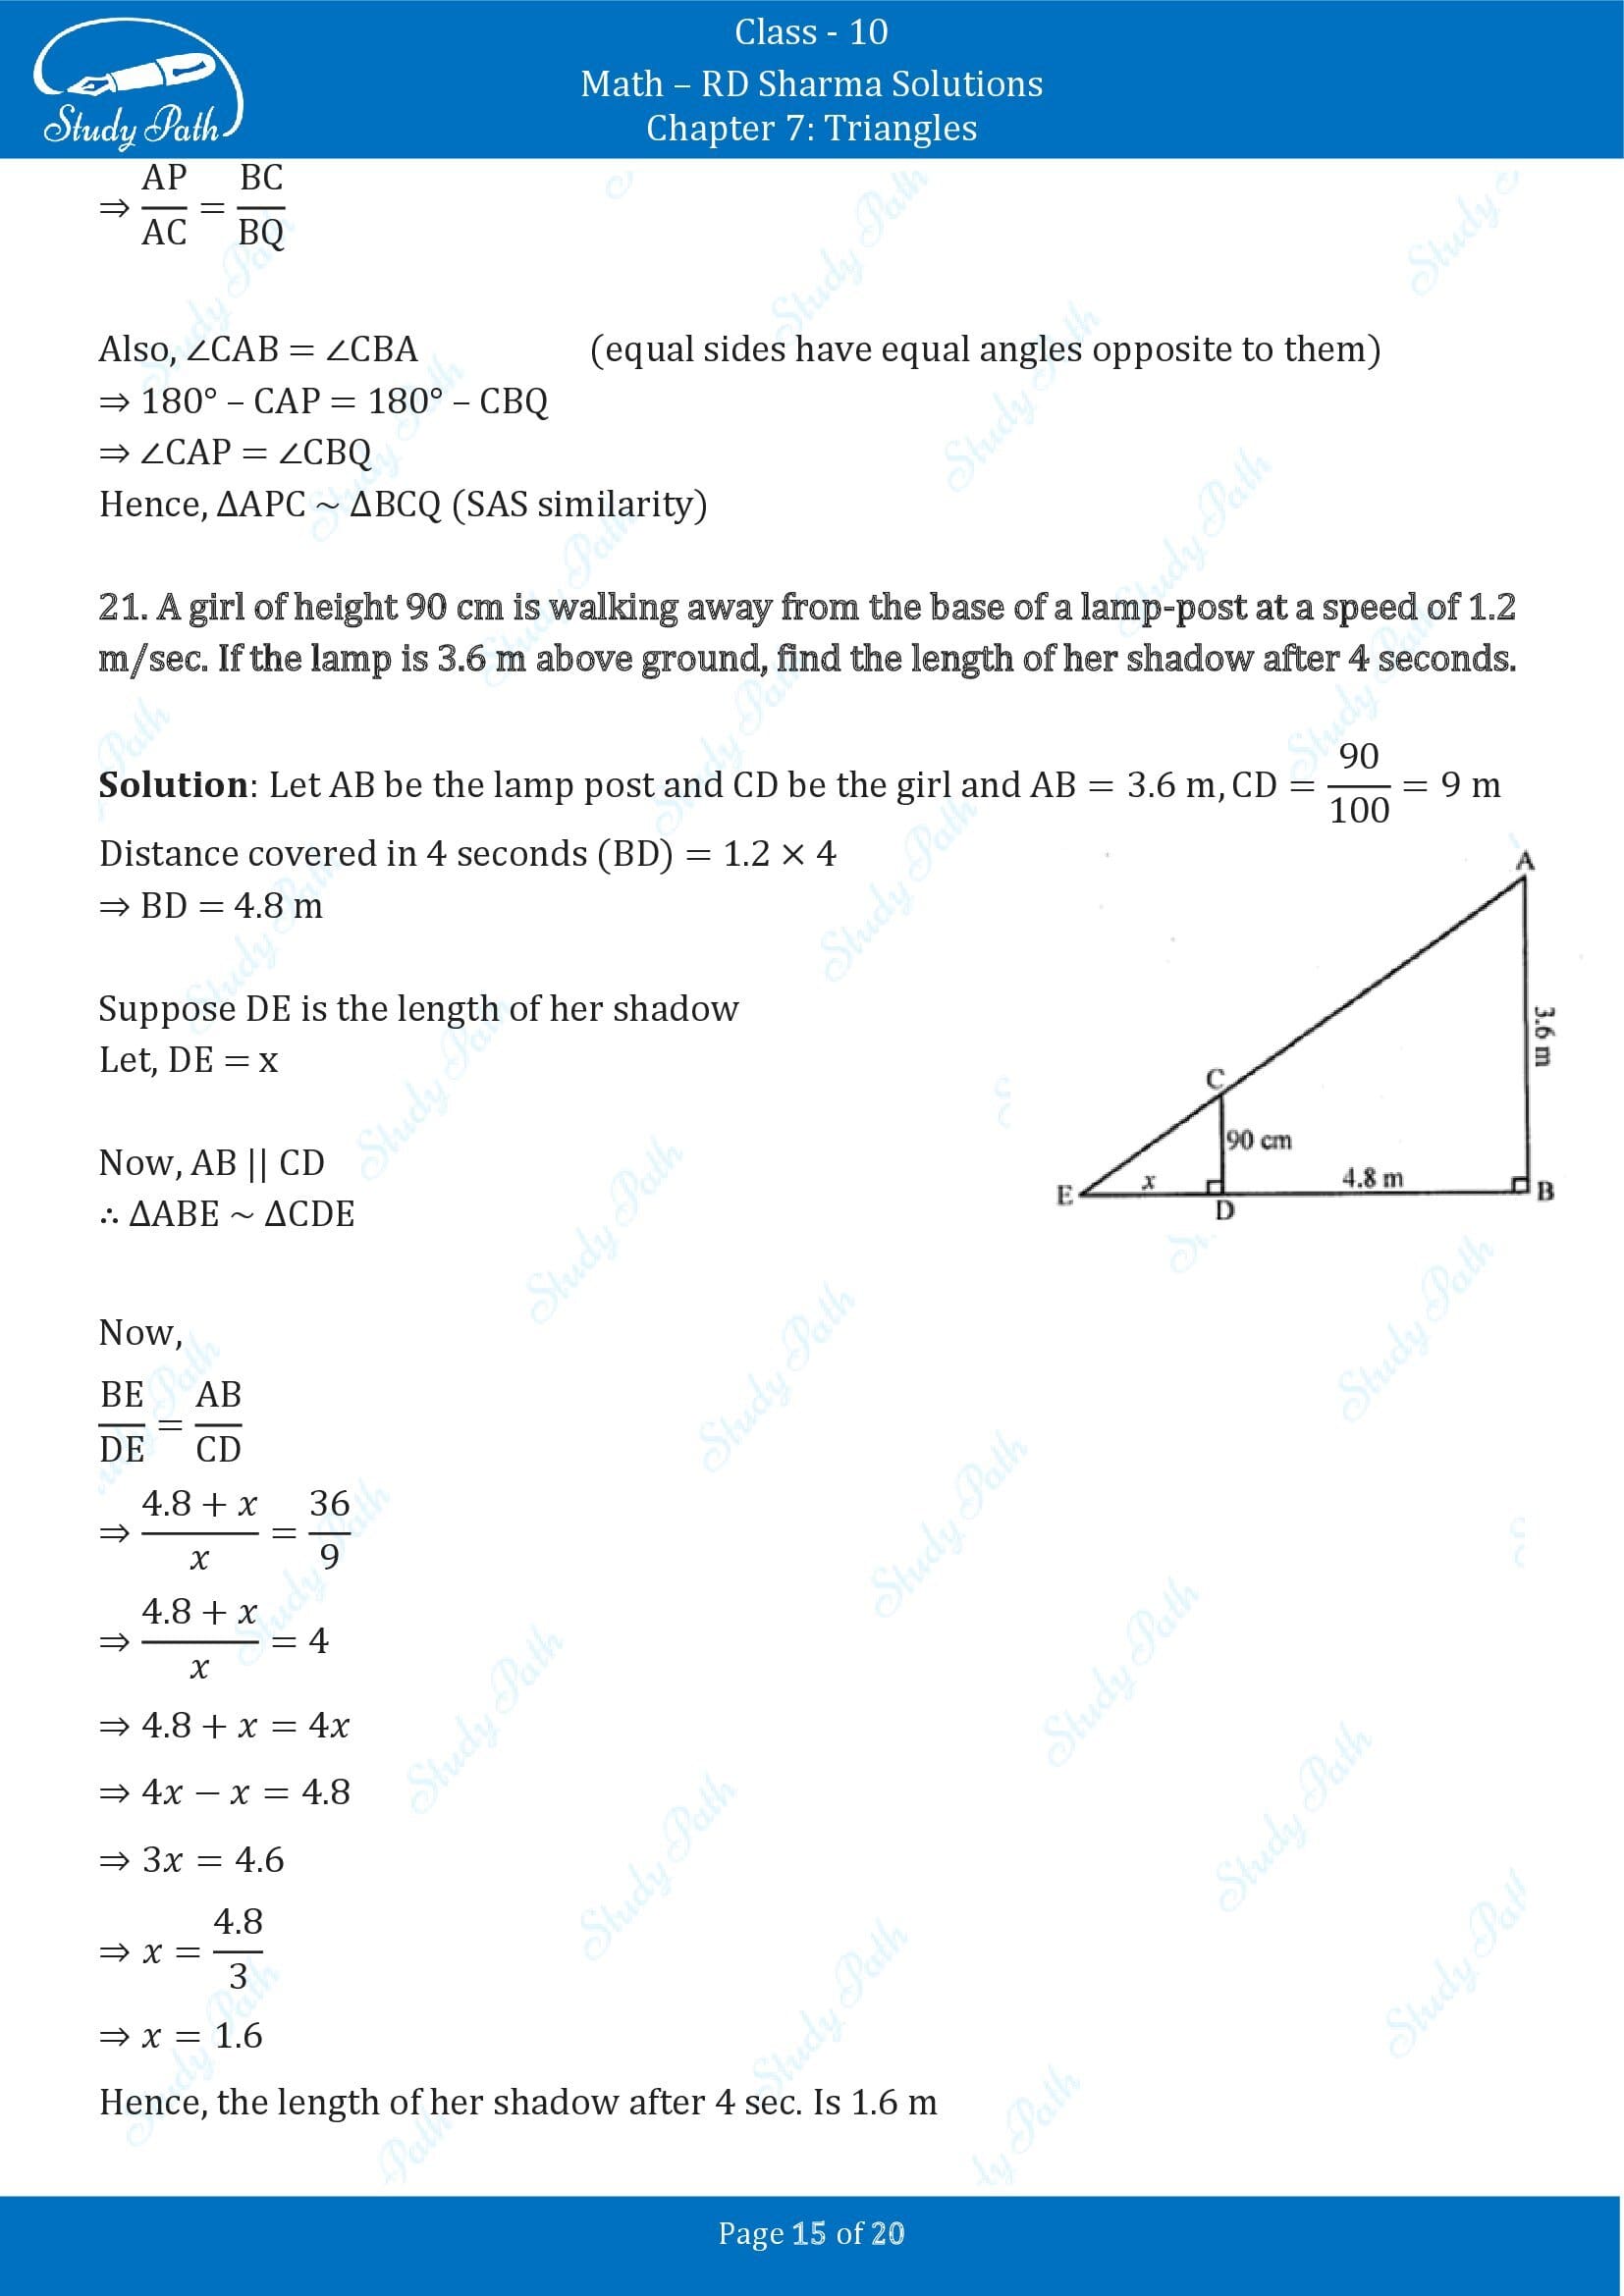 RD Sharma Solutions Class 10 Chapter 7 Triangles Exercise 7.5 00015